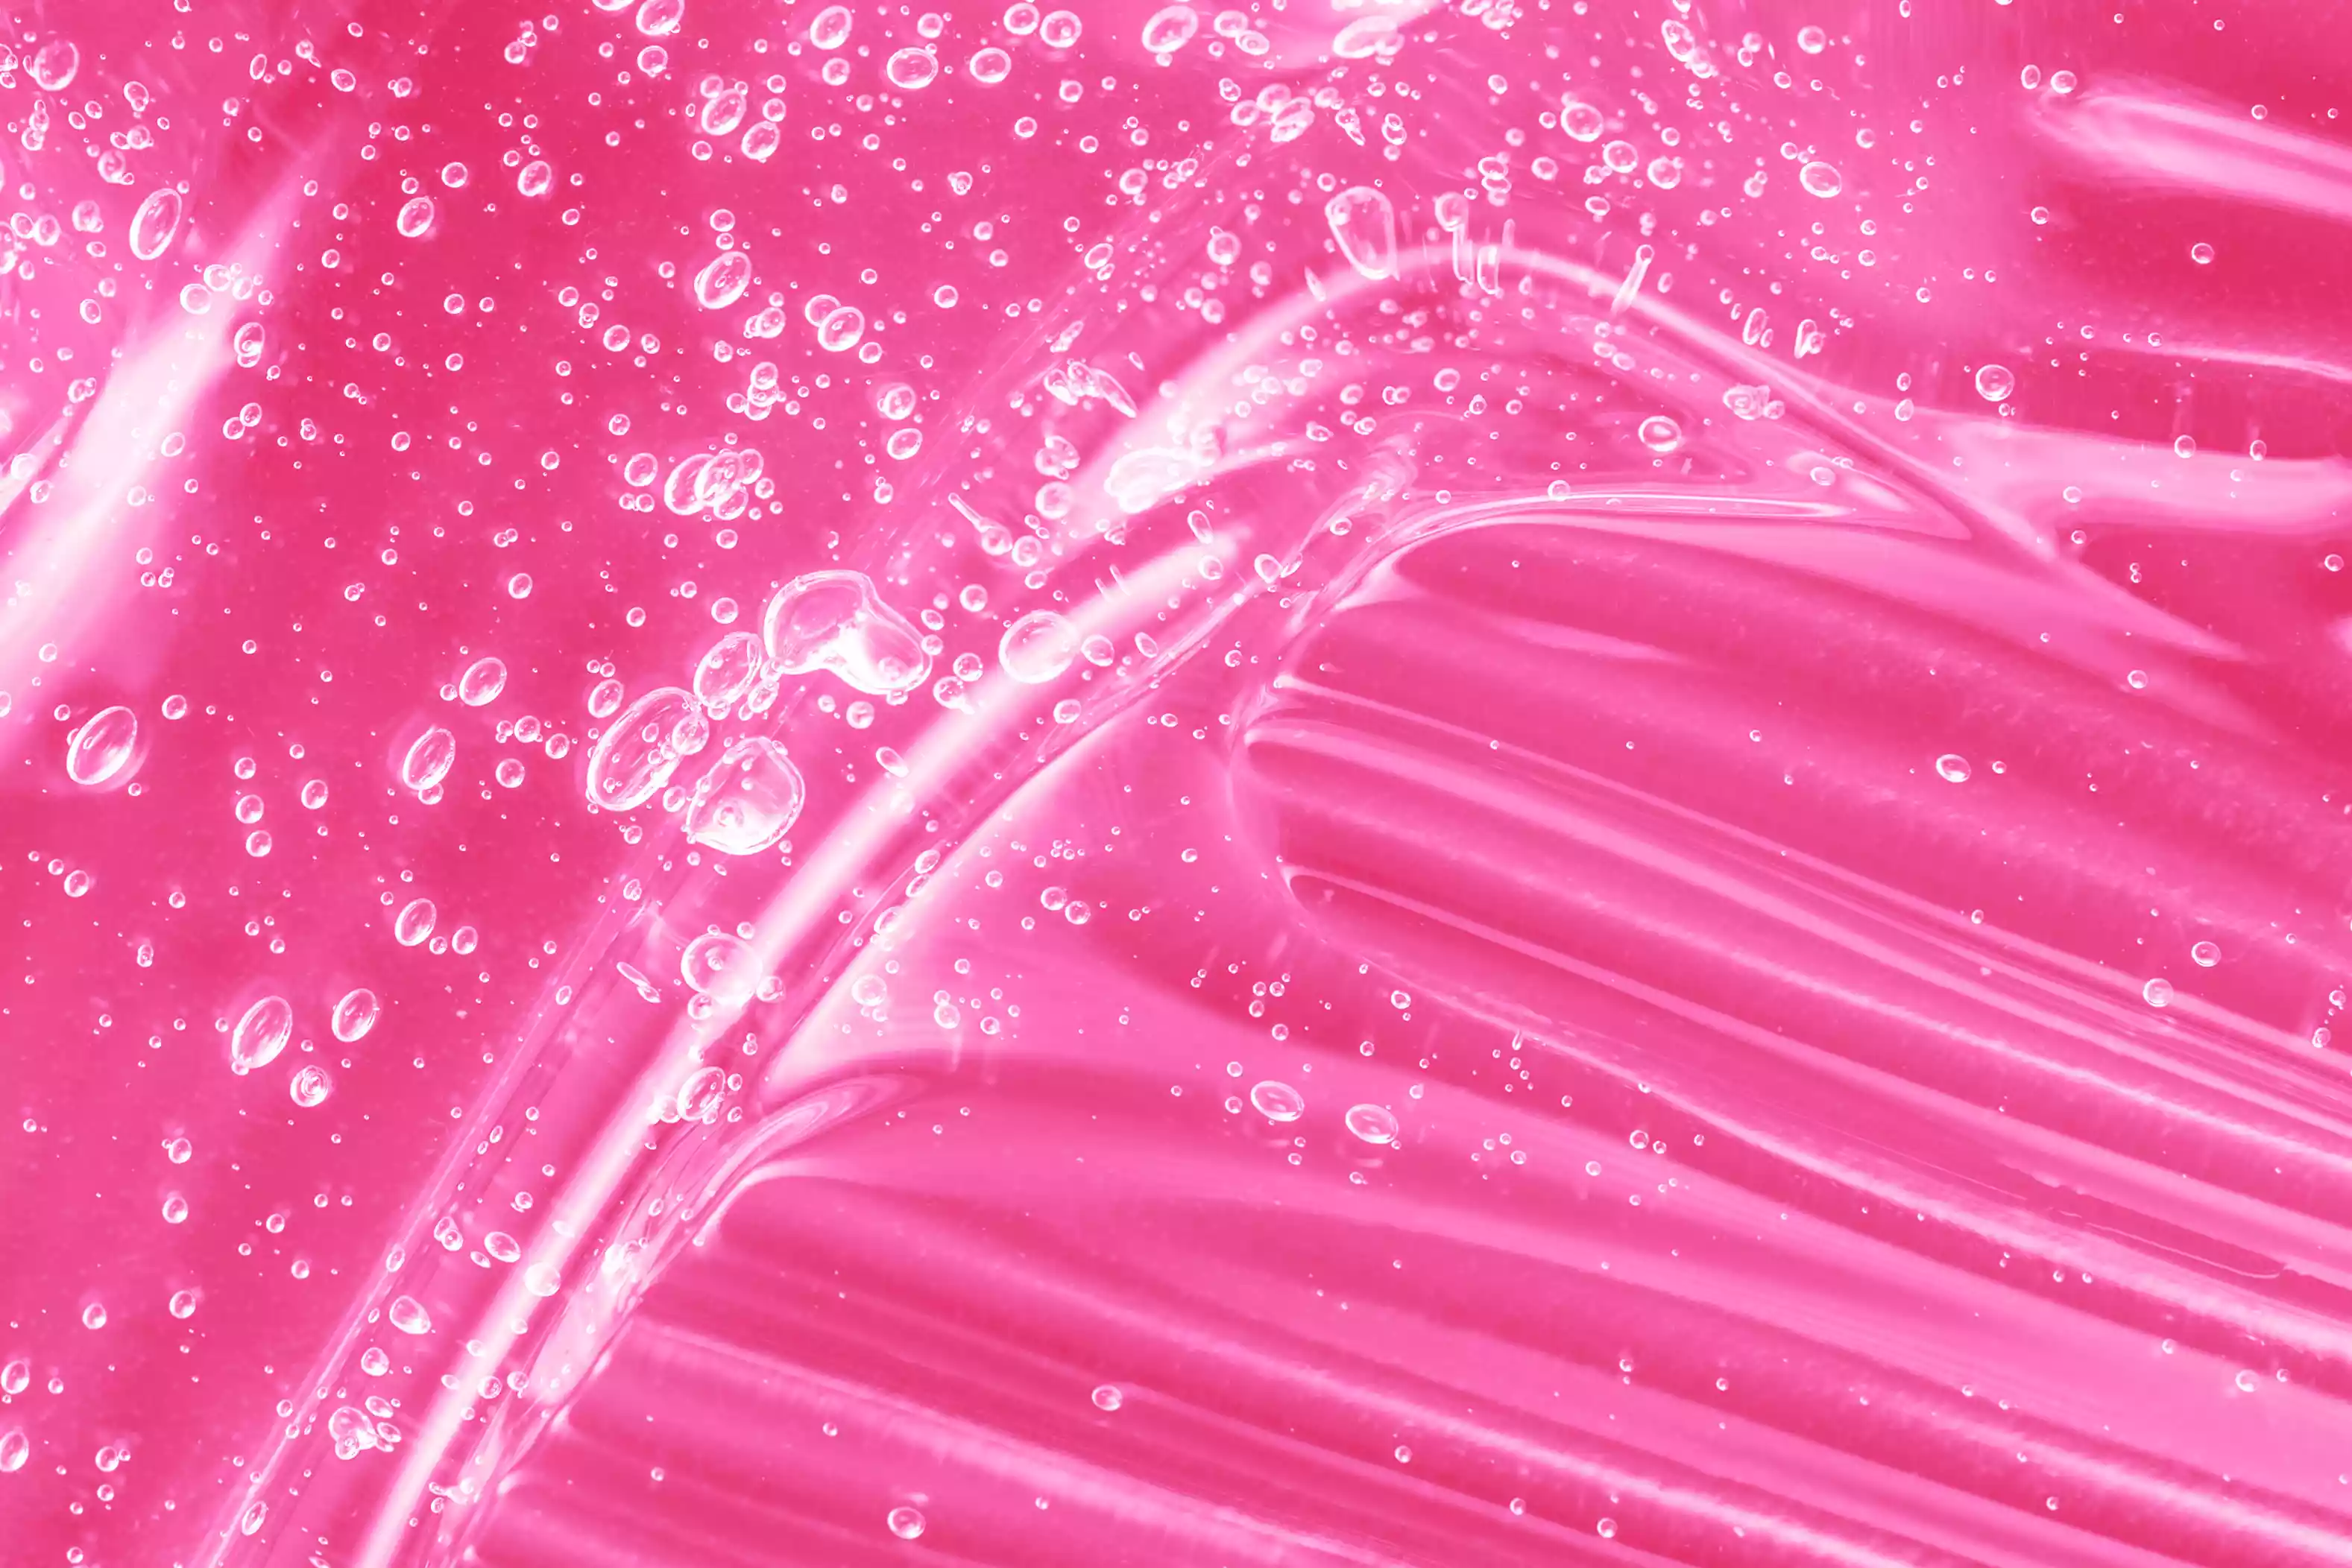 jelly on pink background